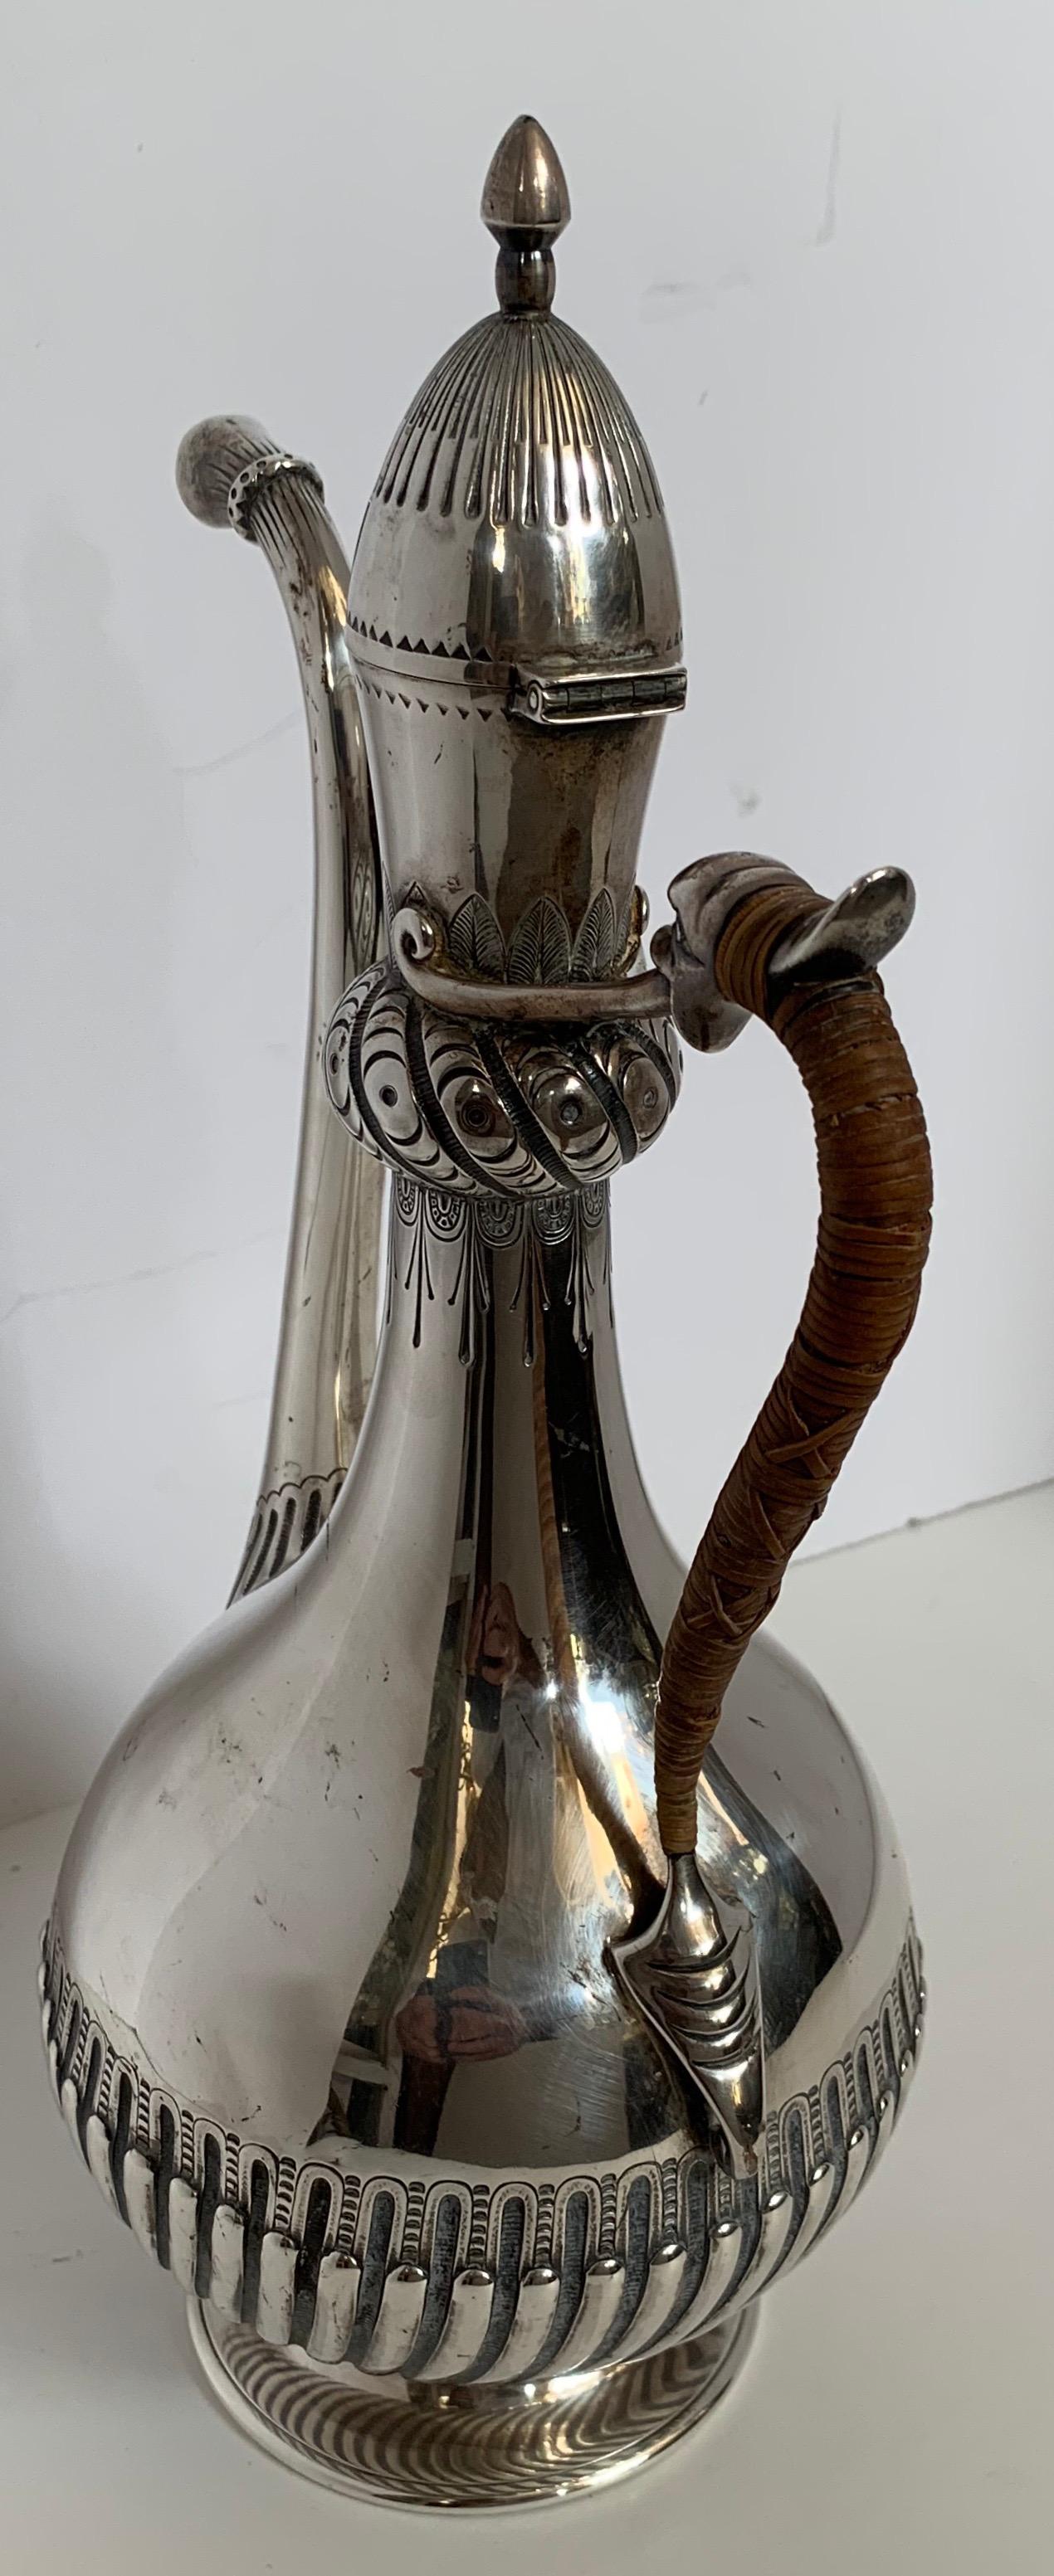 19th Century Wonderful Gorham Sterling Silver Rattan Dolphin Coffee Tea Pot Decanter Pitcher For Sale